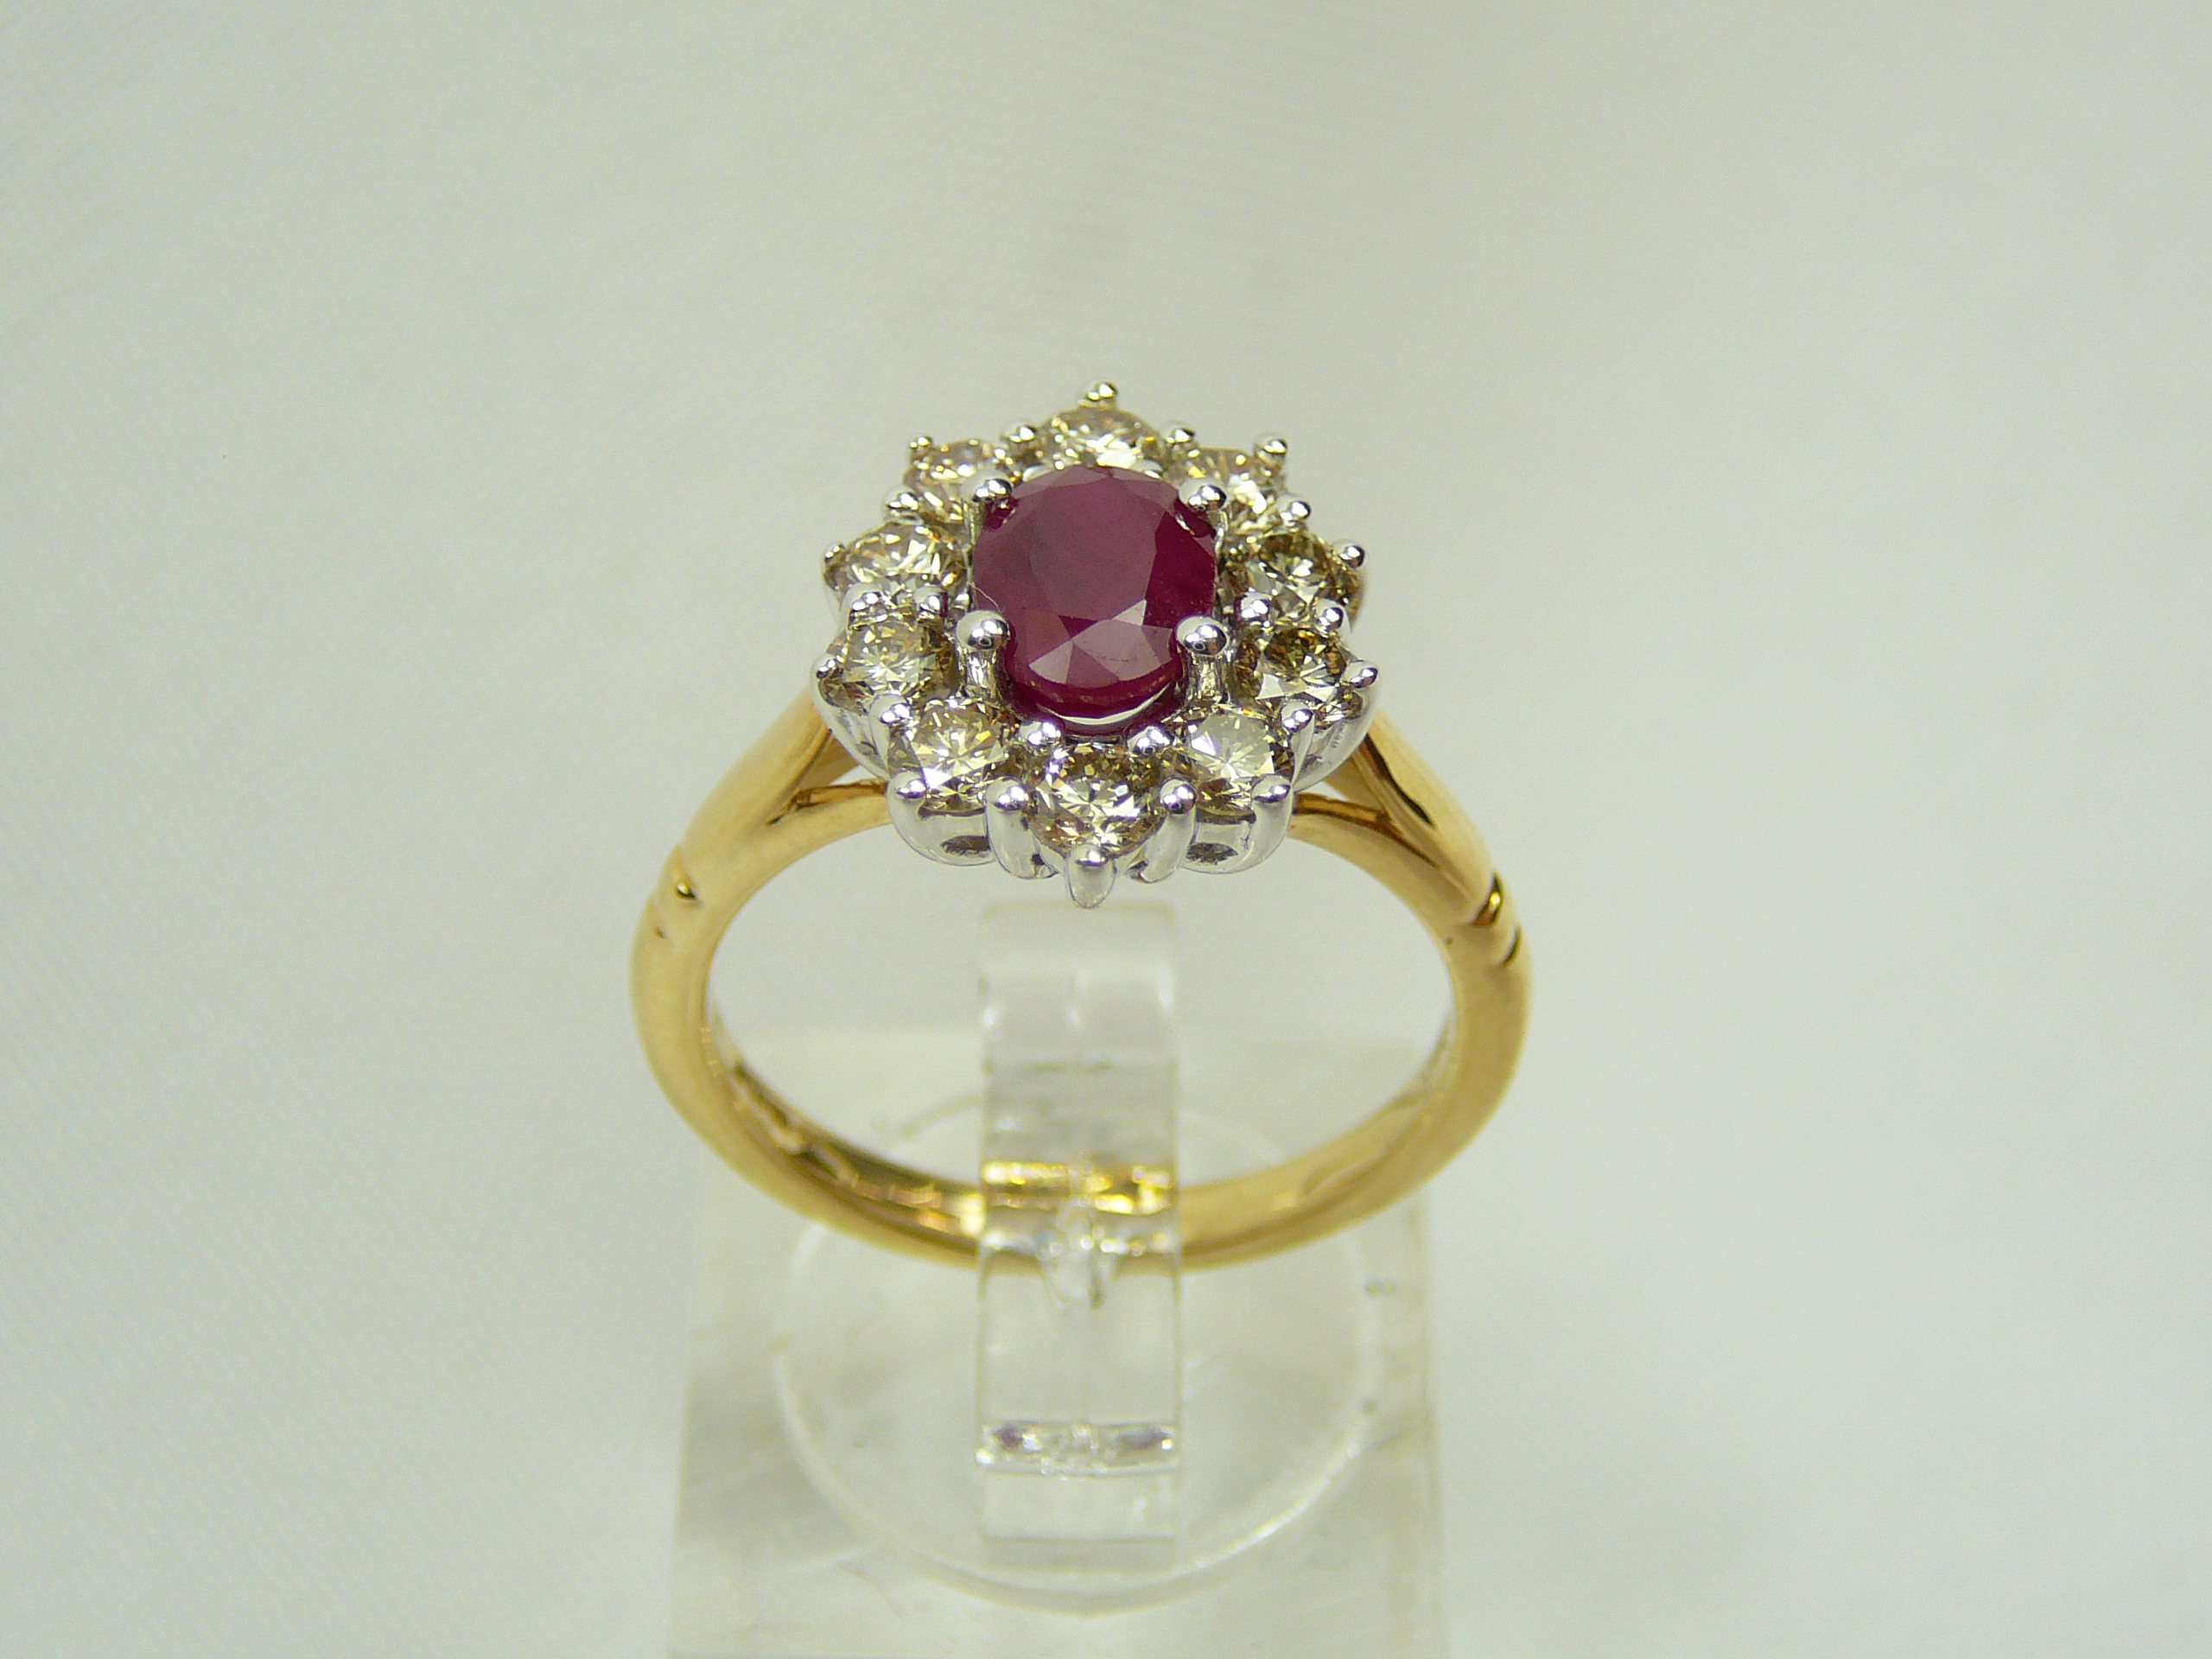 9ct gold ruby and diamond ring - Image 2 of 4